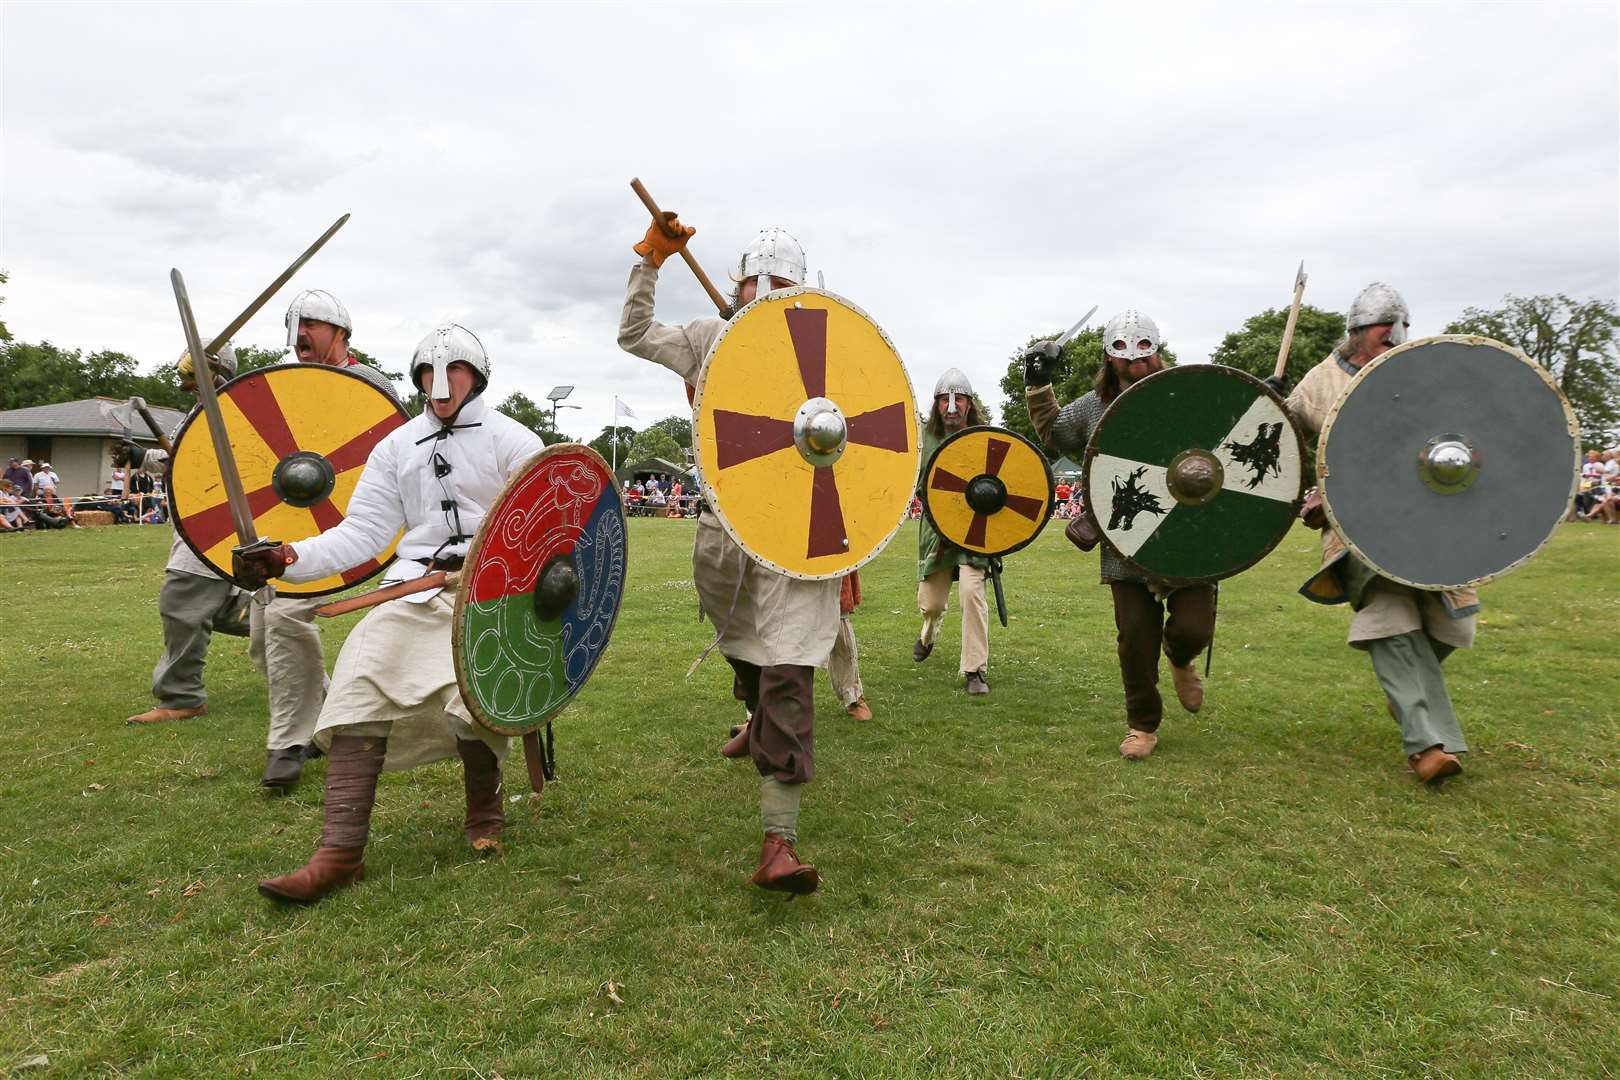 Hordes of Viking raiders plundered and pillaged Kent's monasteries and villages for decades